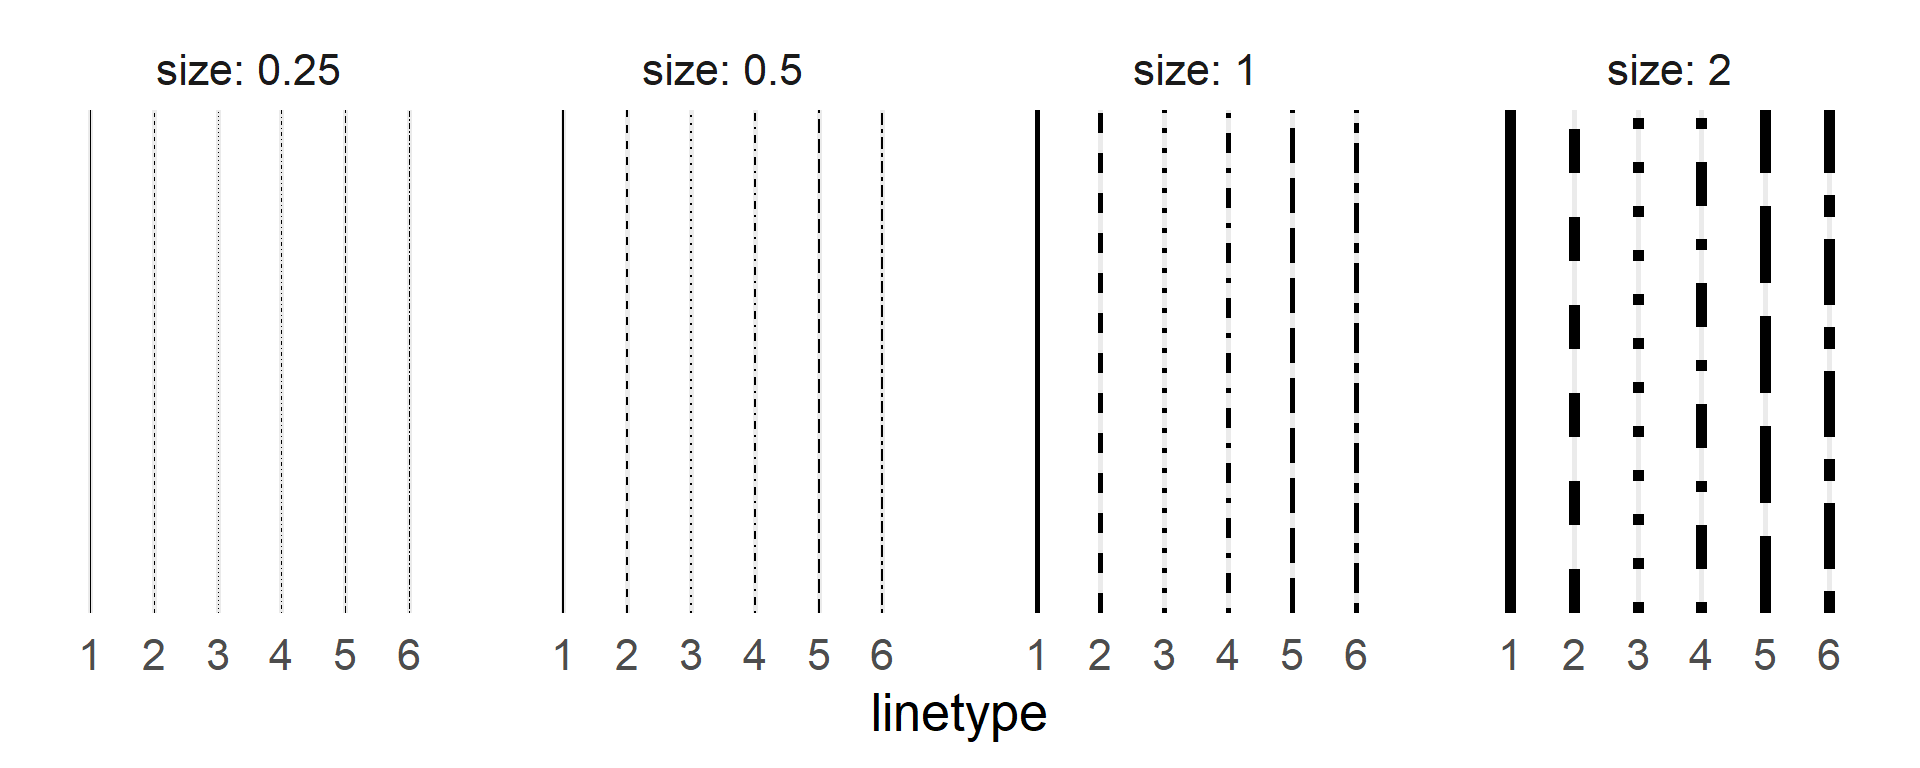 The 6 linetype values at different sizes.